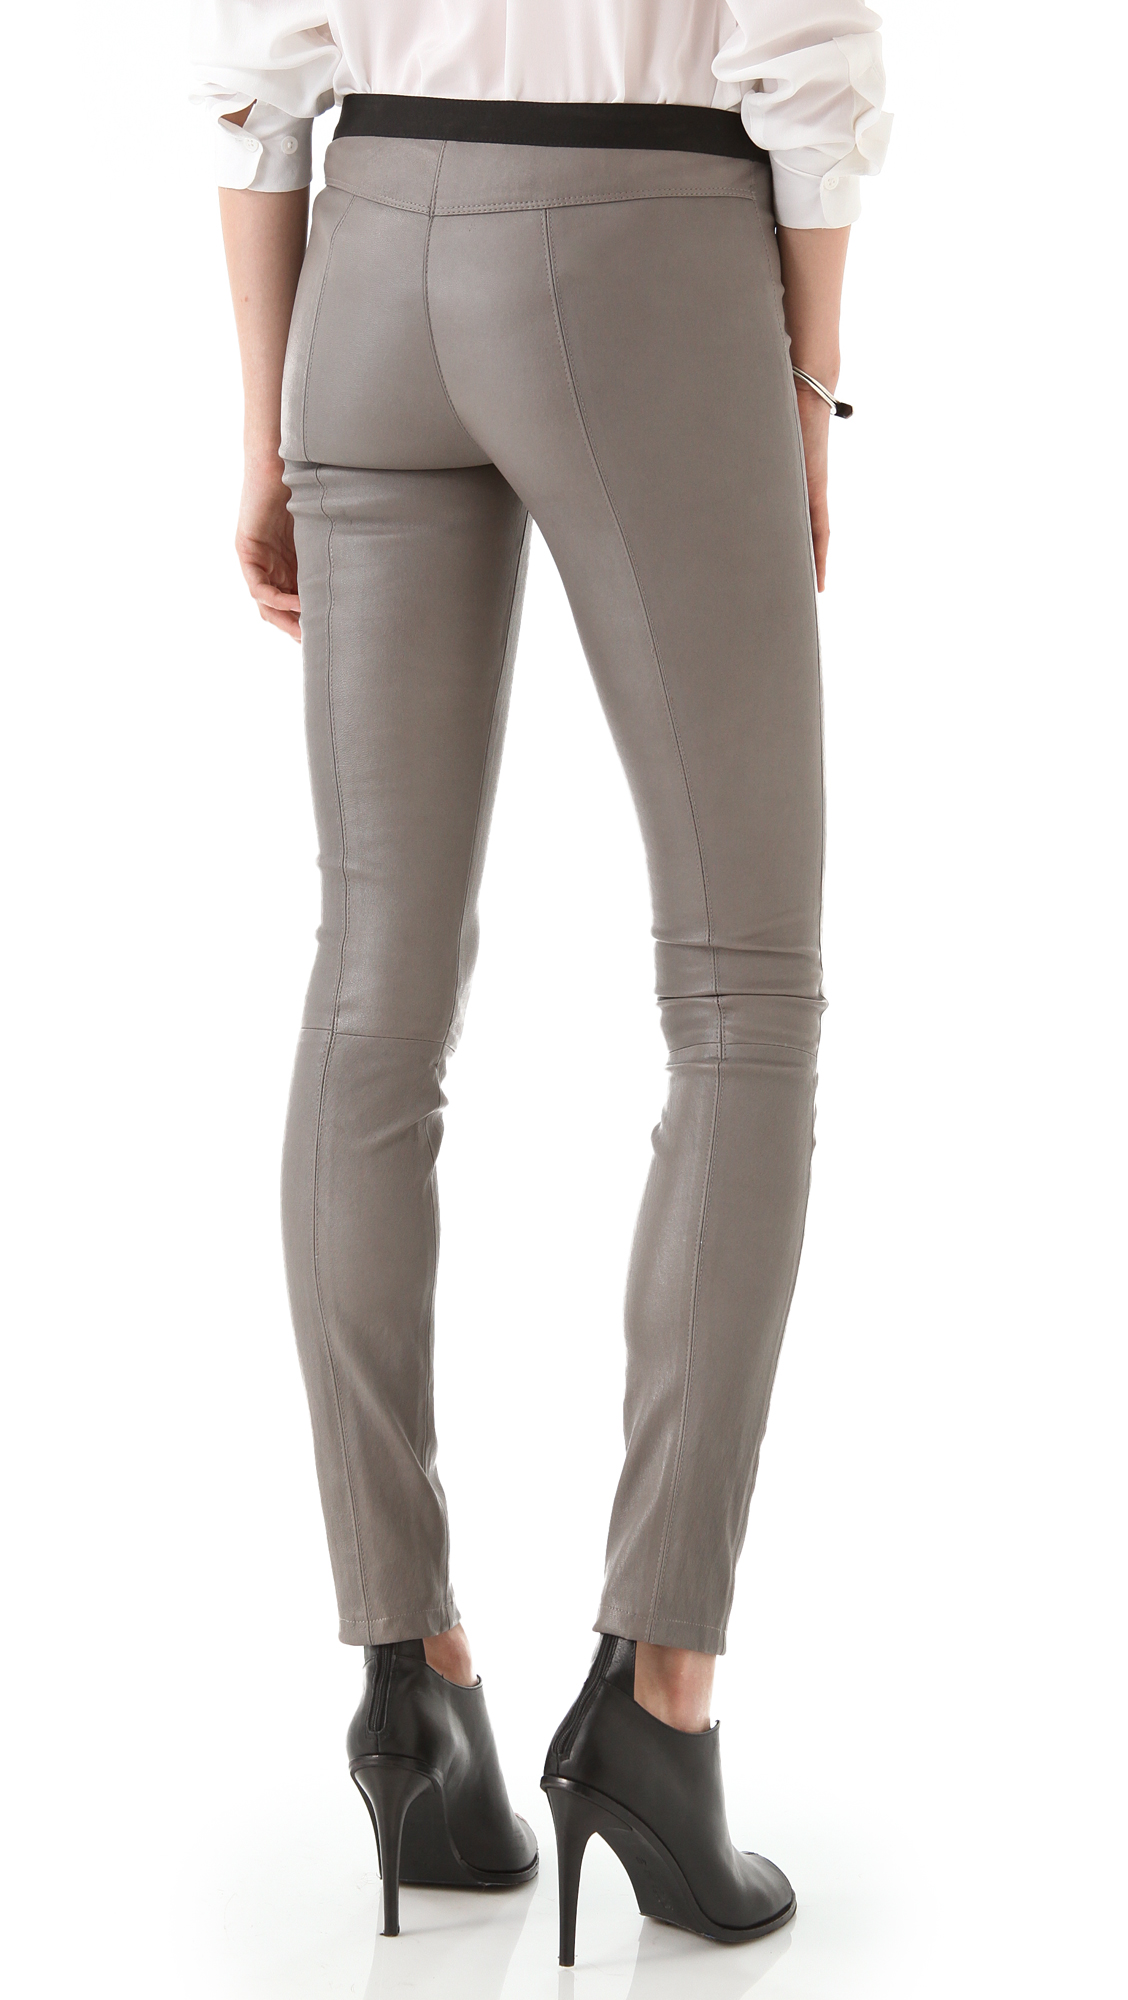 Lyst - Theory Ima Leather Pants in Gray